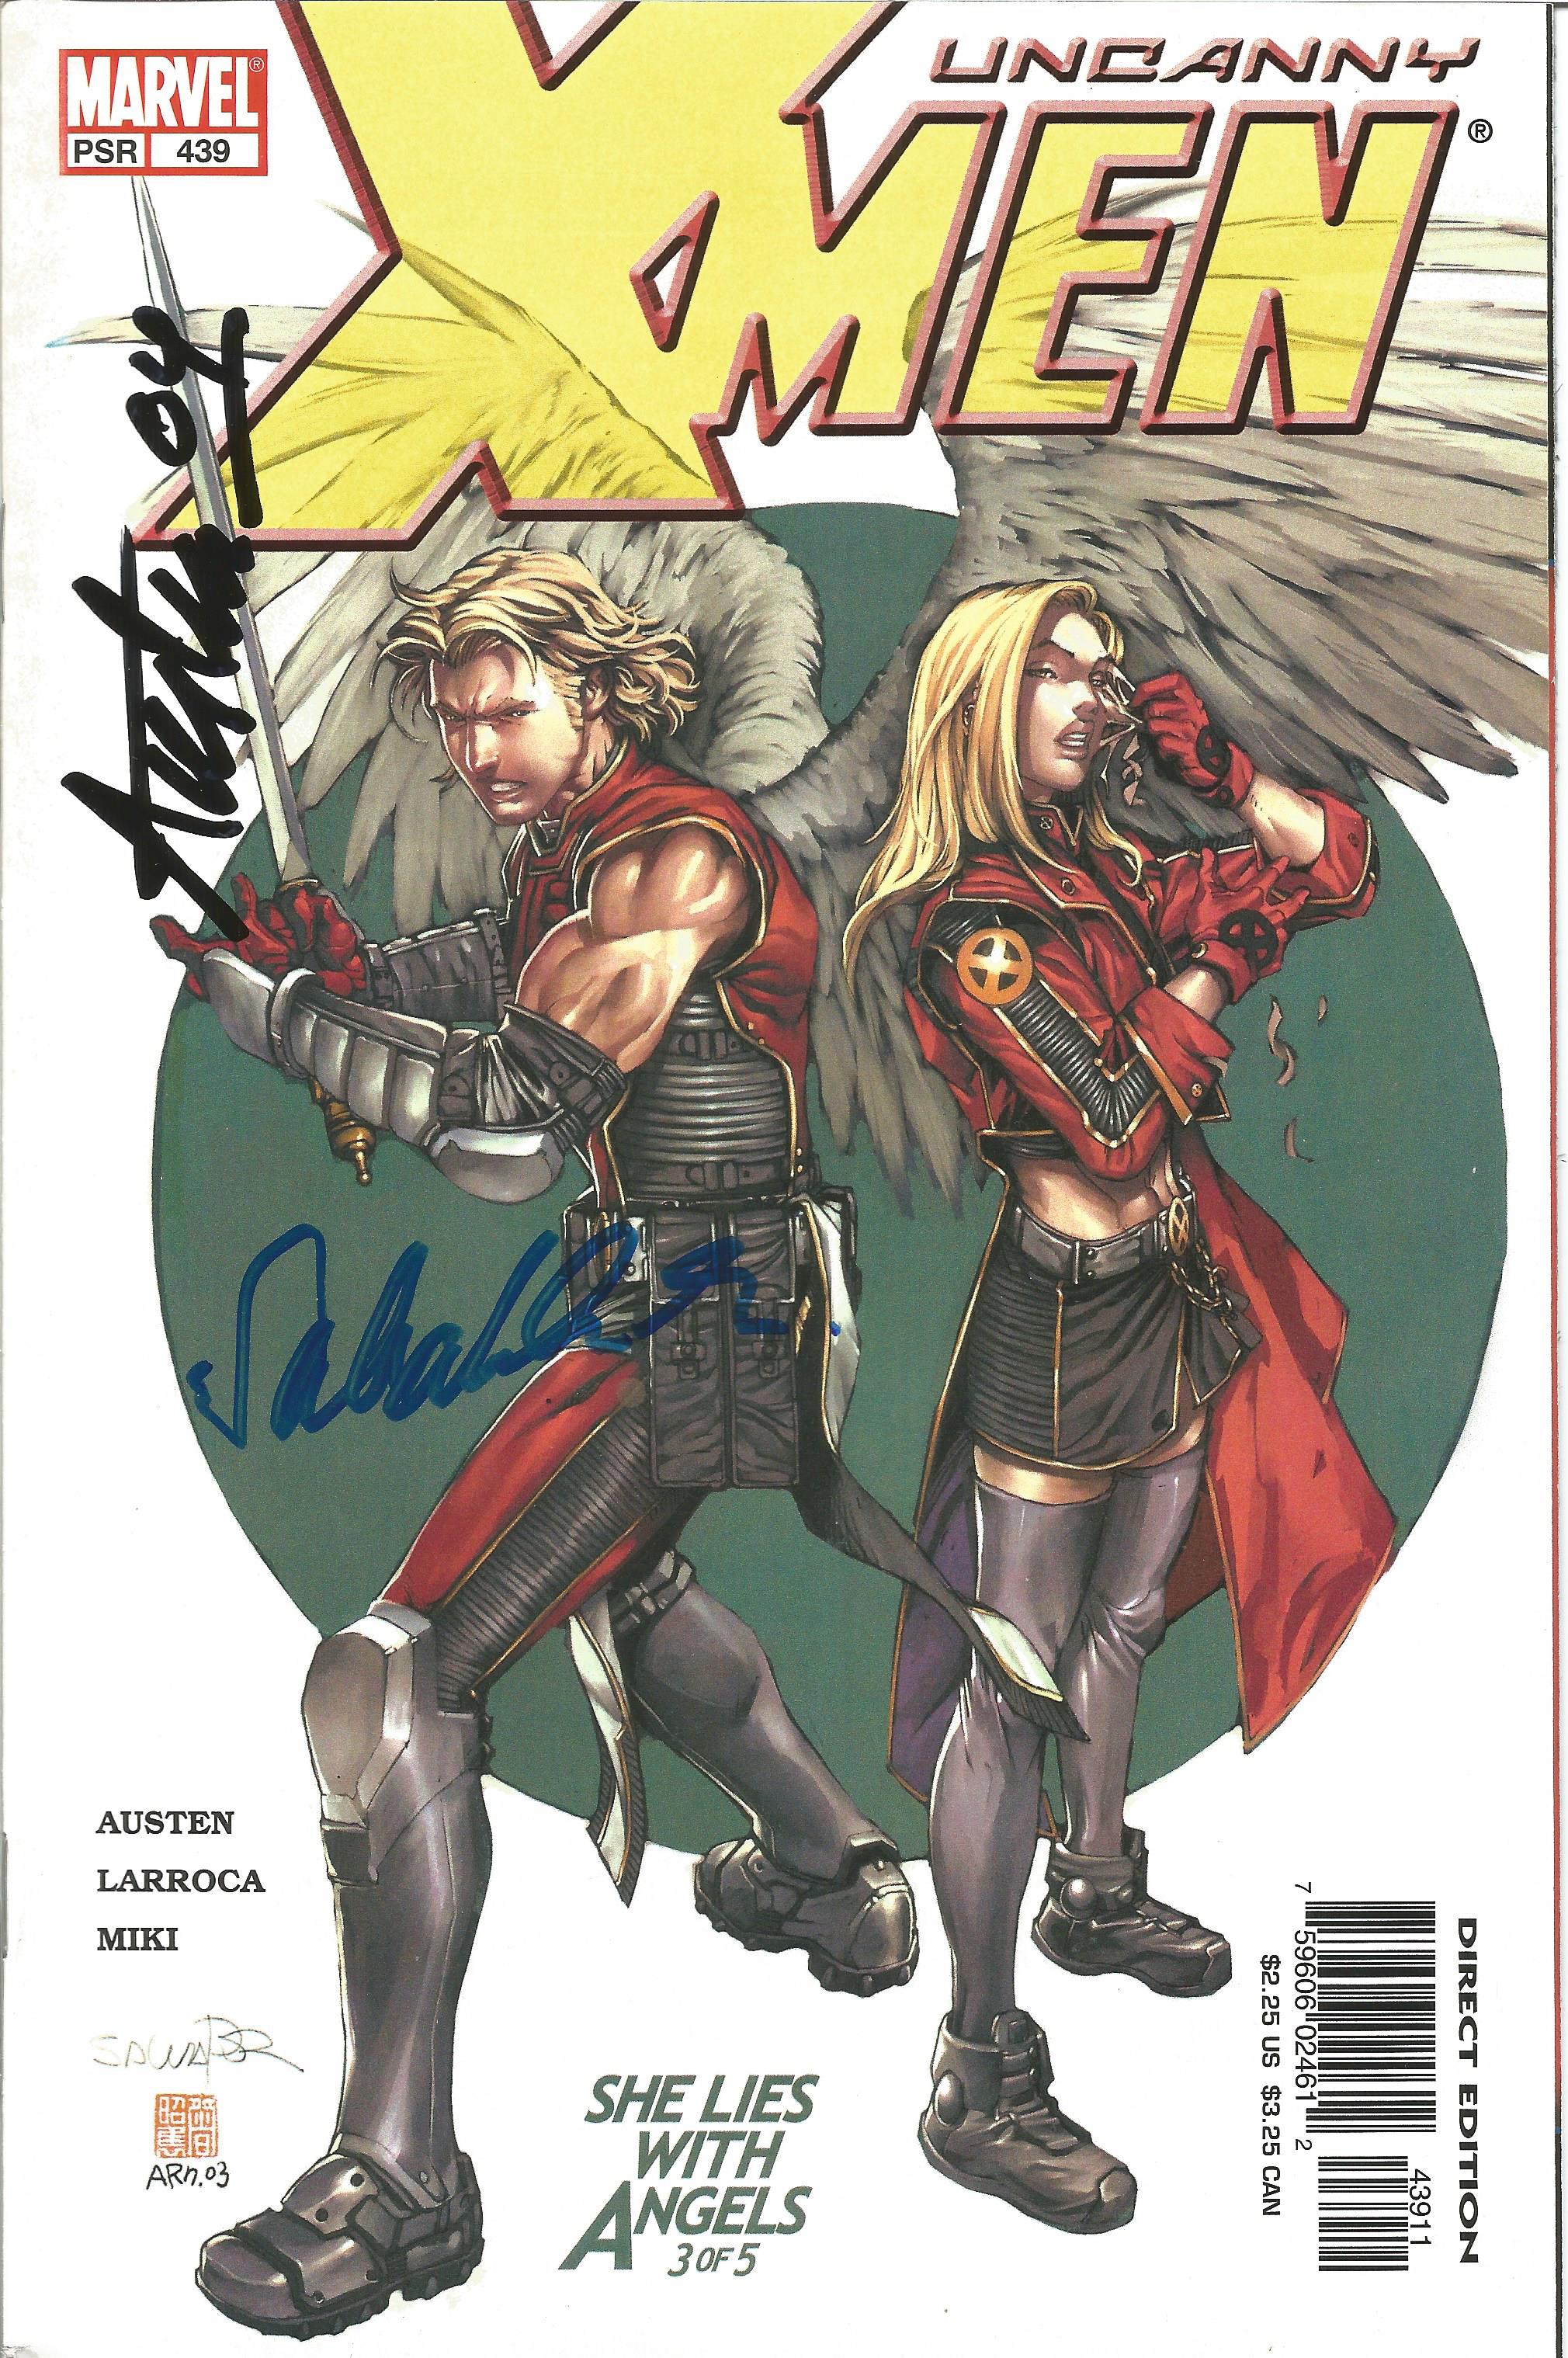 Salvador Larroca and Chuck Austen signed Uncanny Xmen- she lies with angels 3 of 5. Signed on